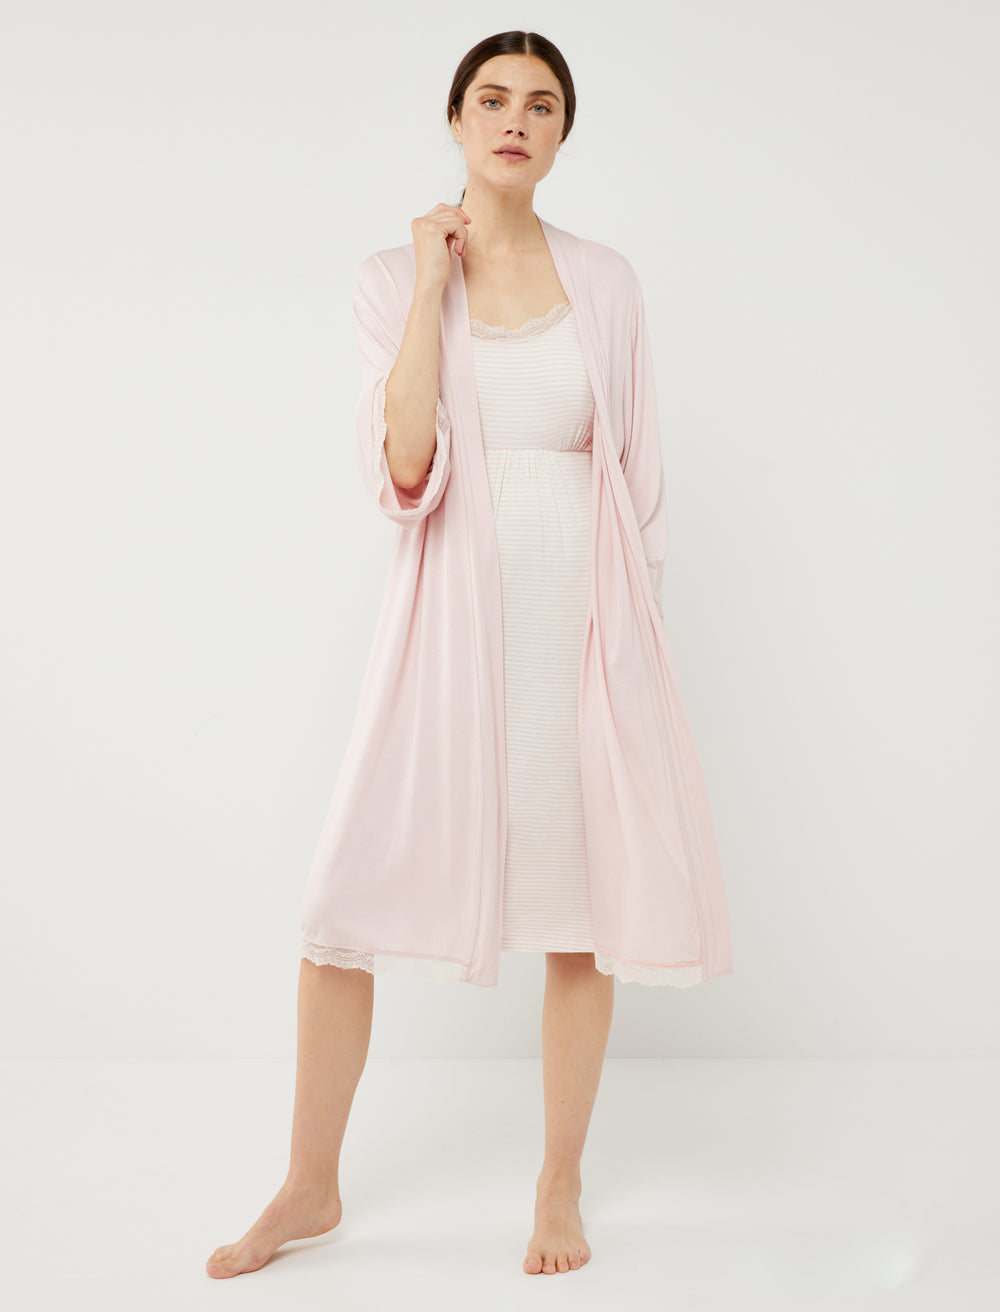 Shop All Sleepwear & Gowns – Kindred Bravely